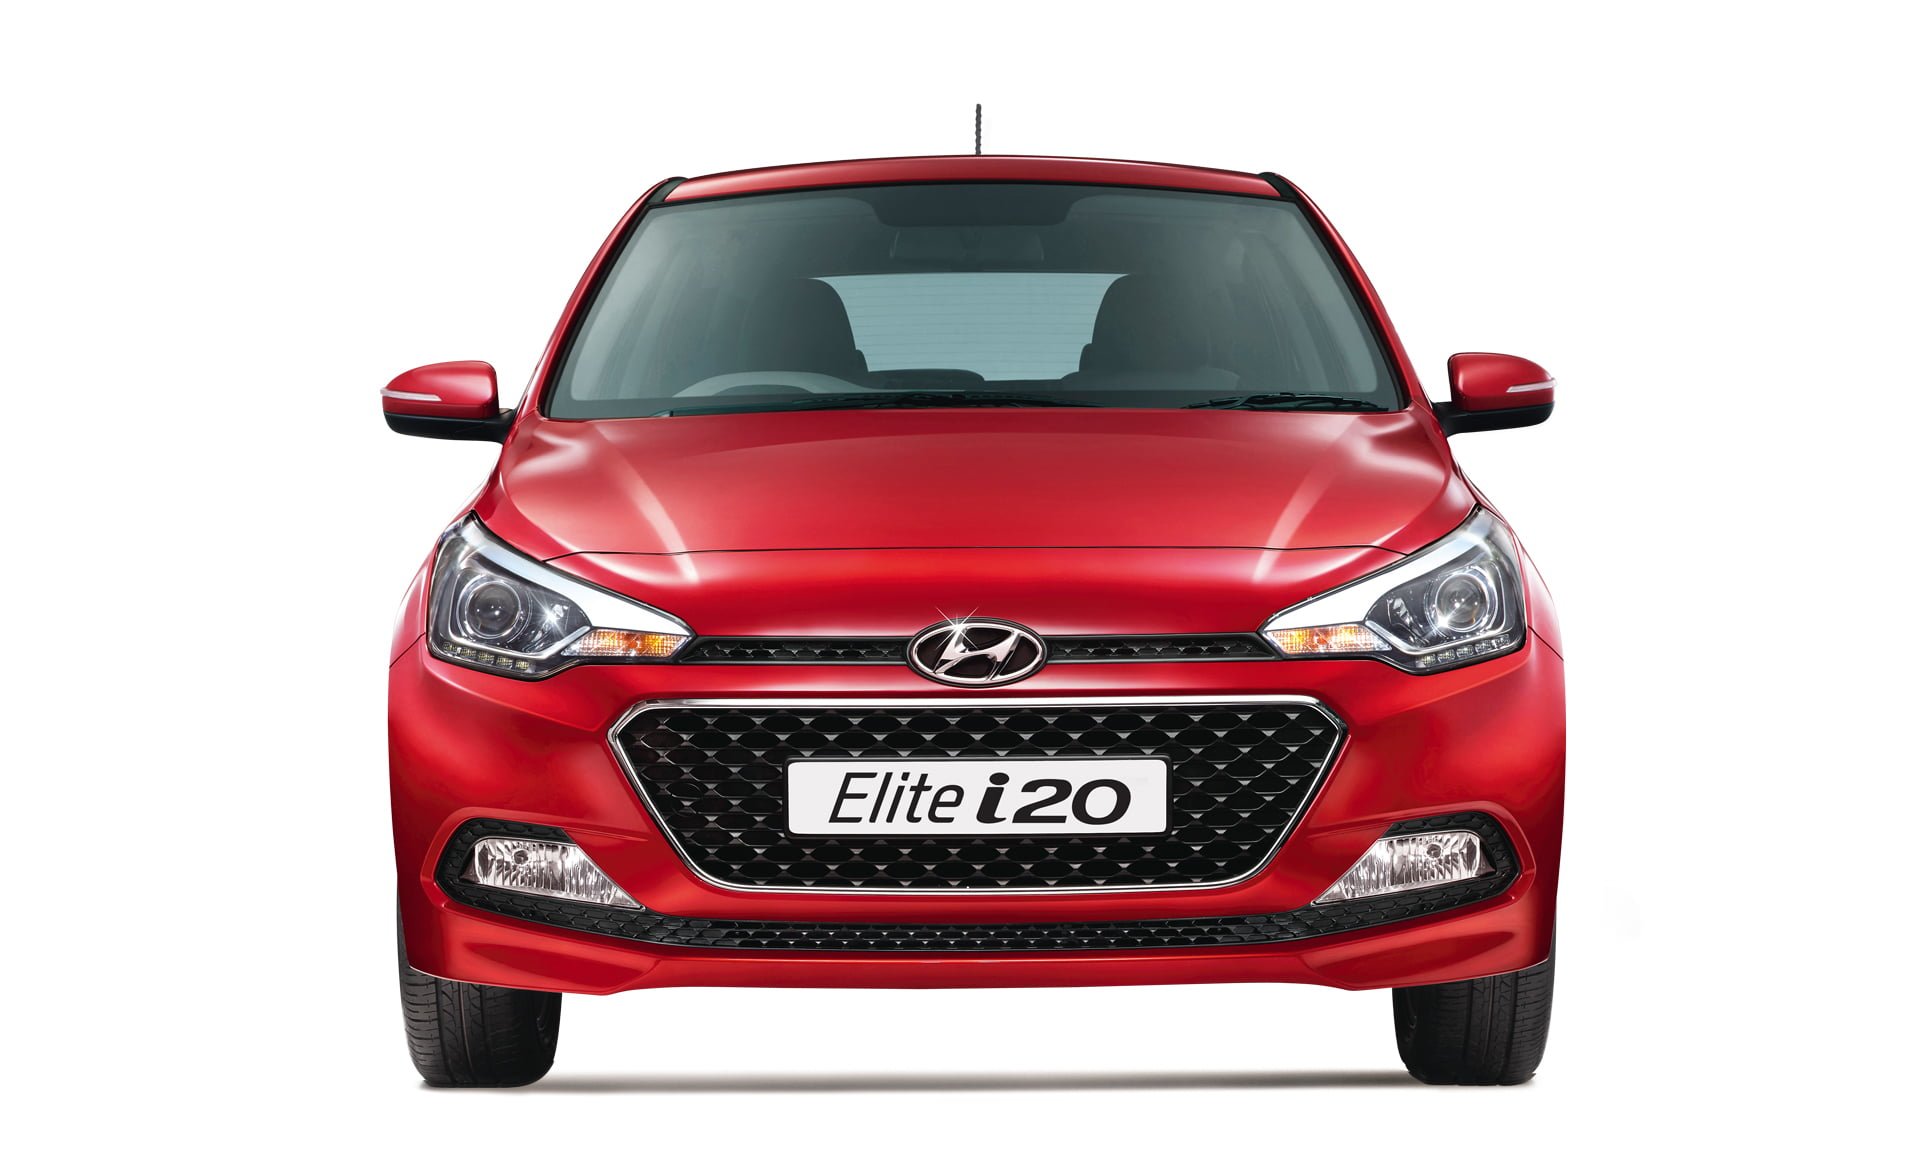 2016-hyundai-elite-i20-official-image-red-front